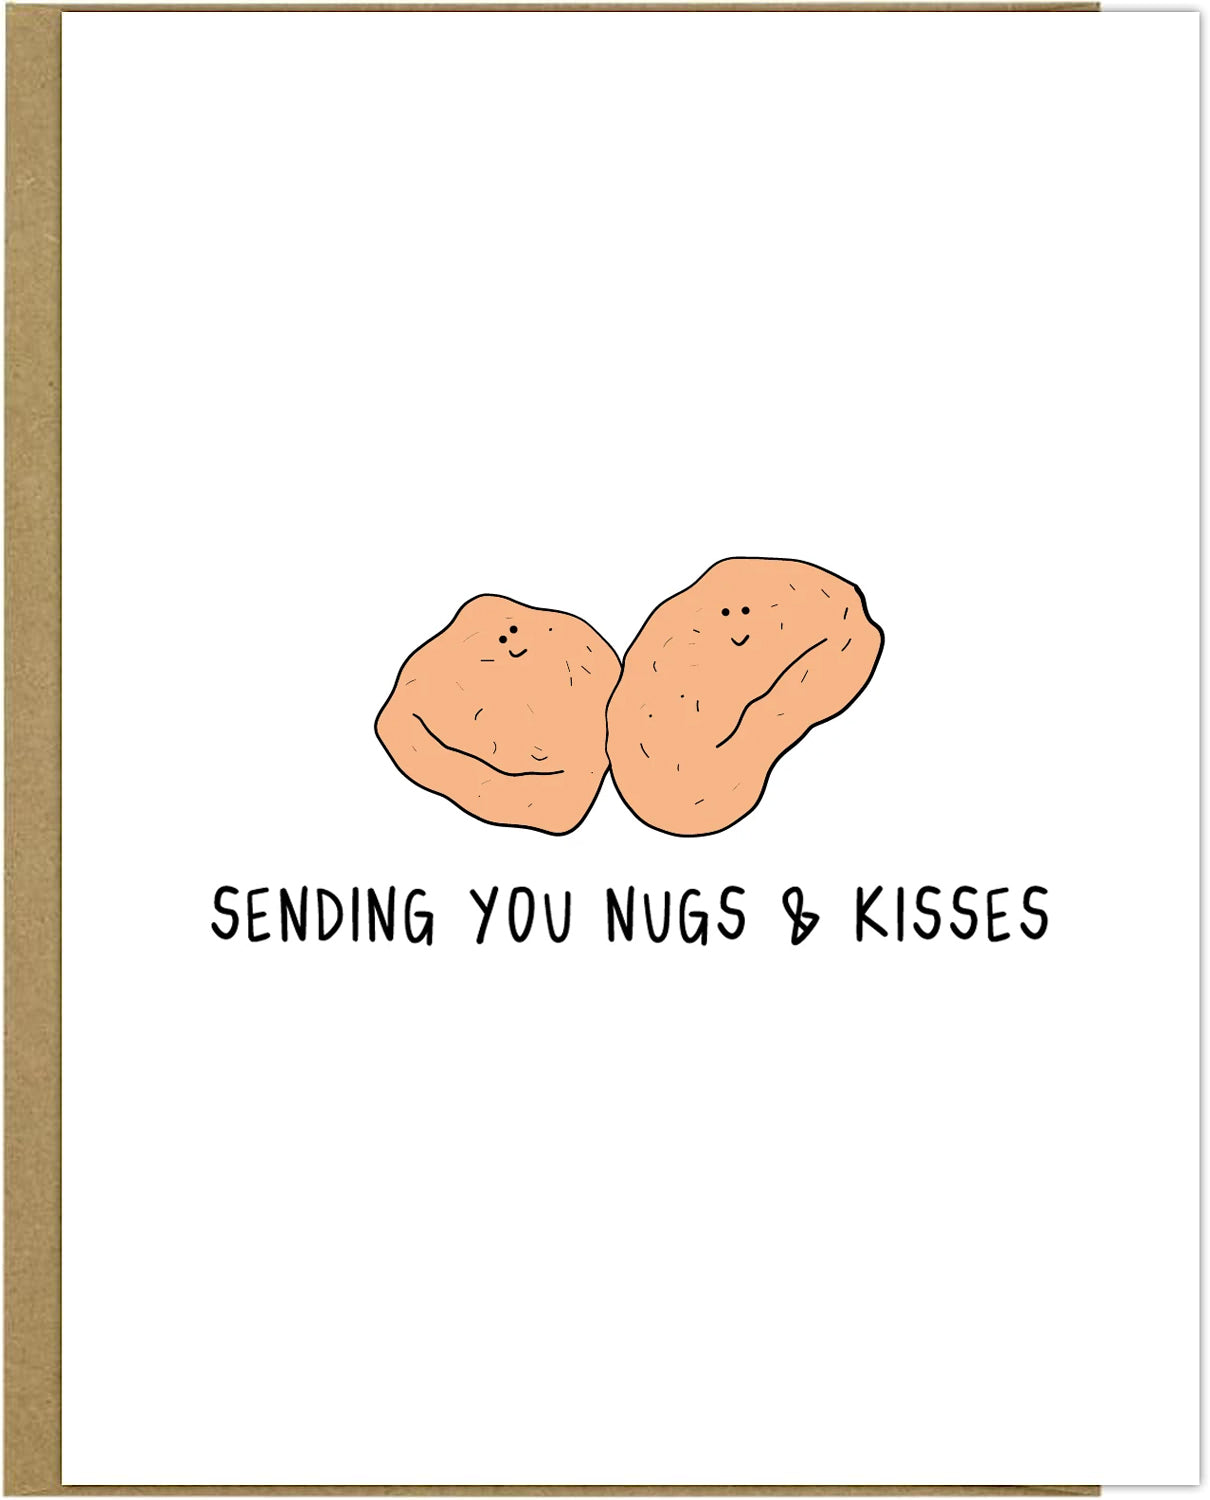 Sending you a Nugs & Kisses Card filled with rockdoodles.